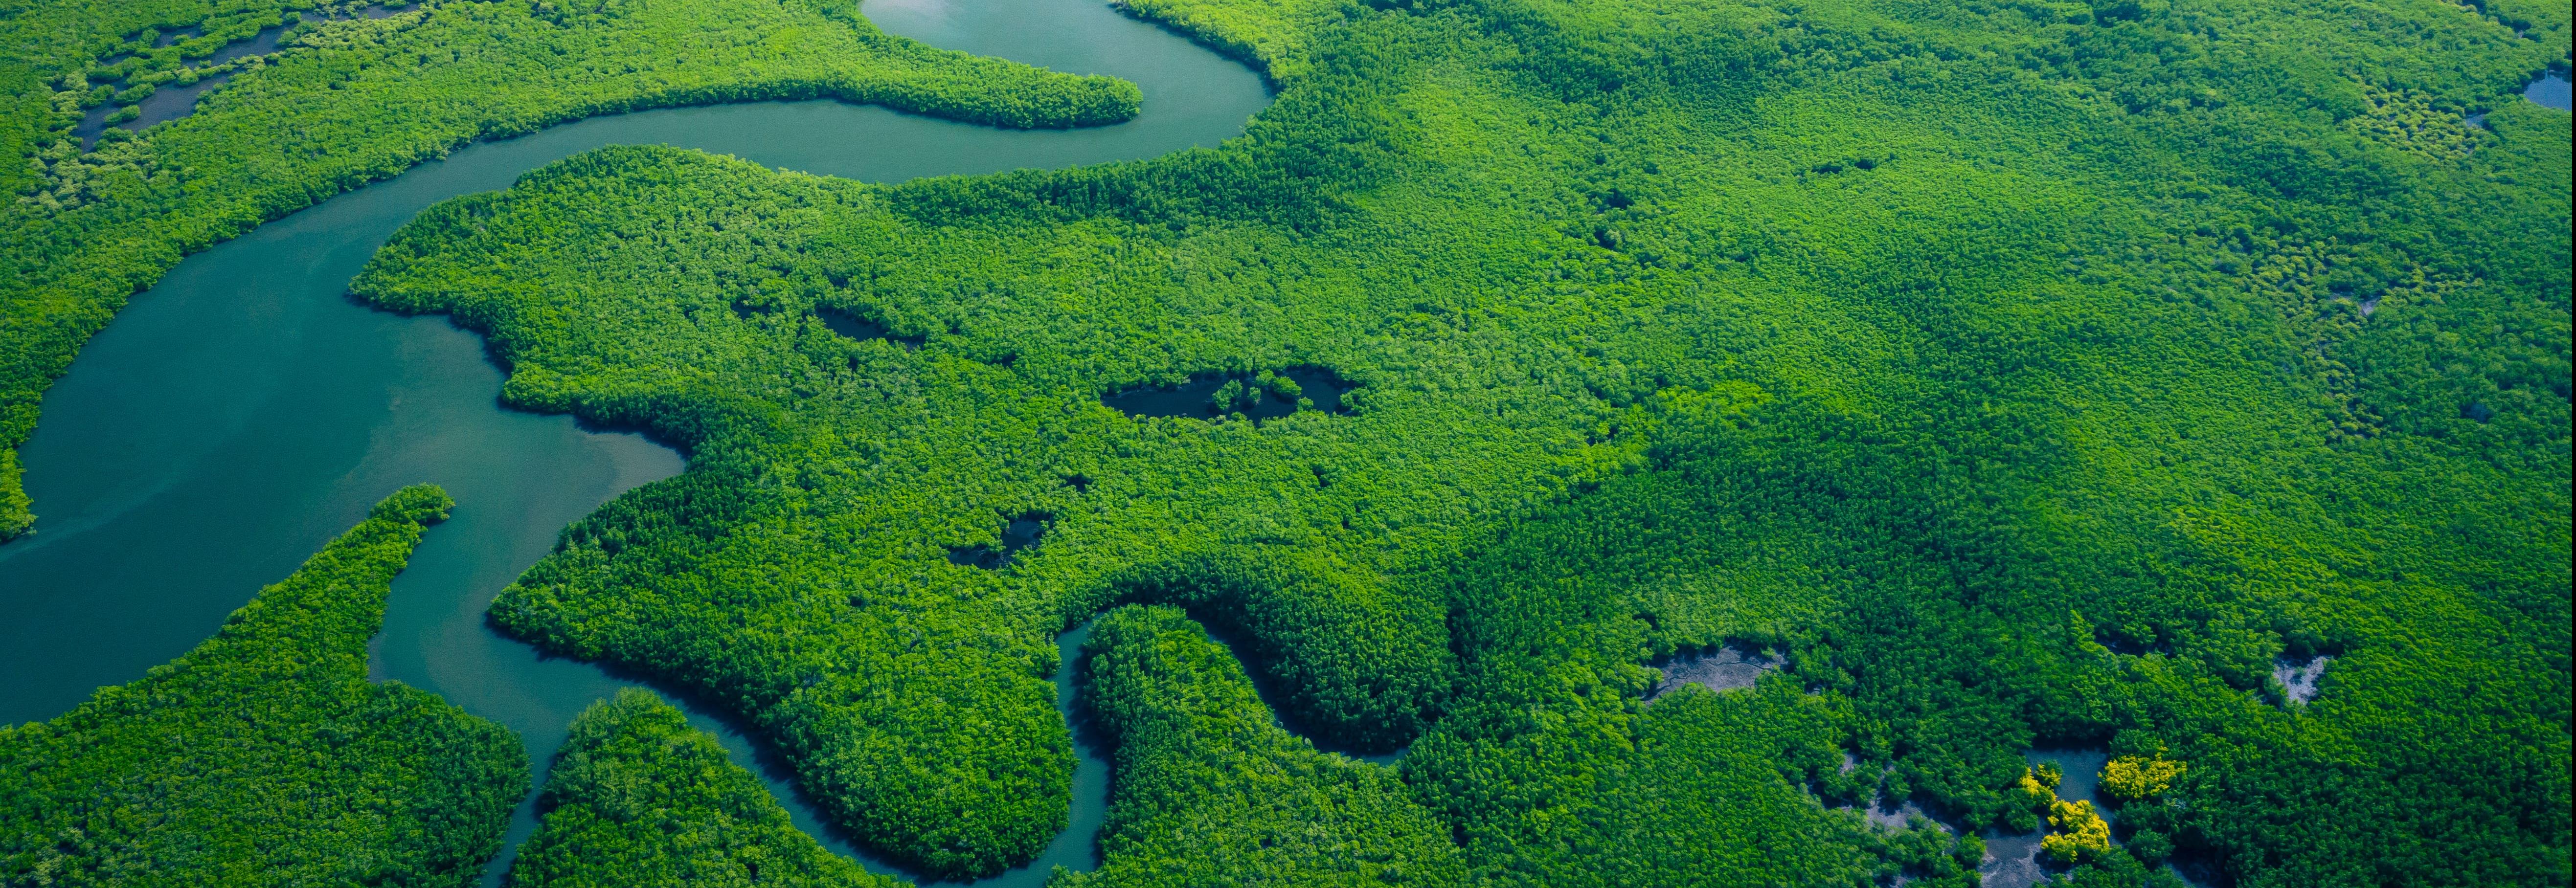 Rainforest and rivers from above